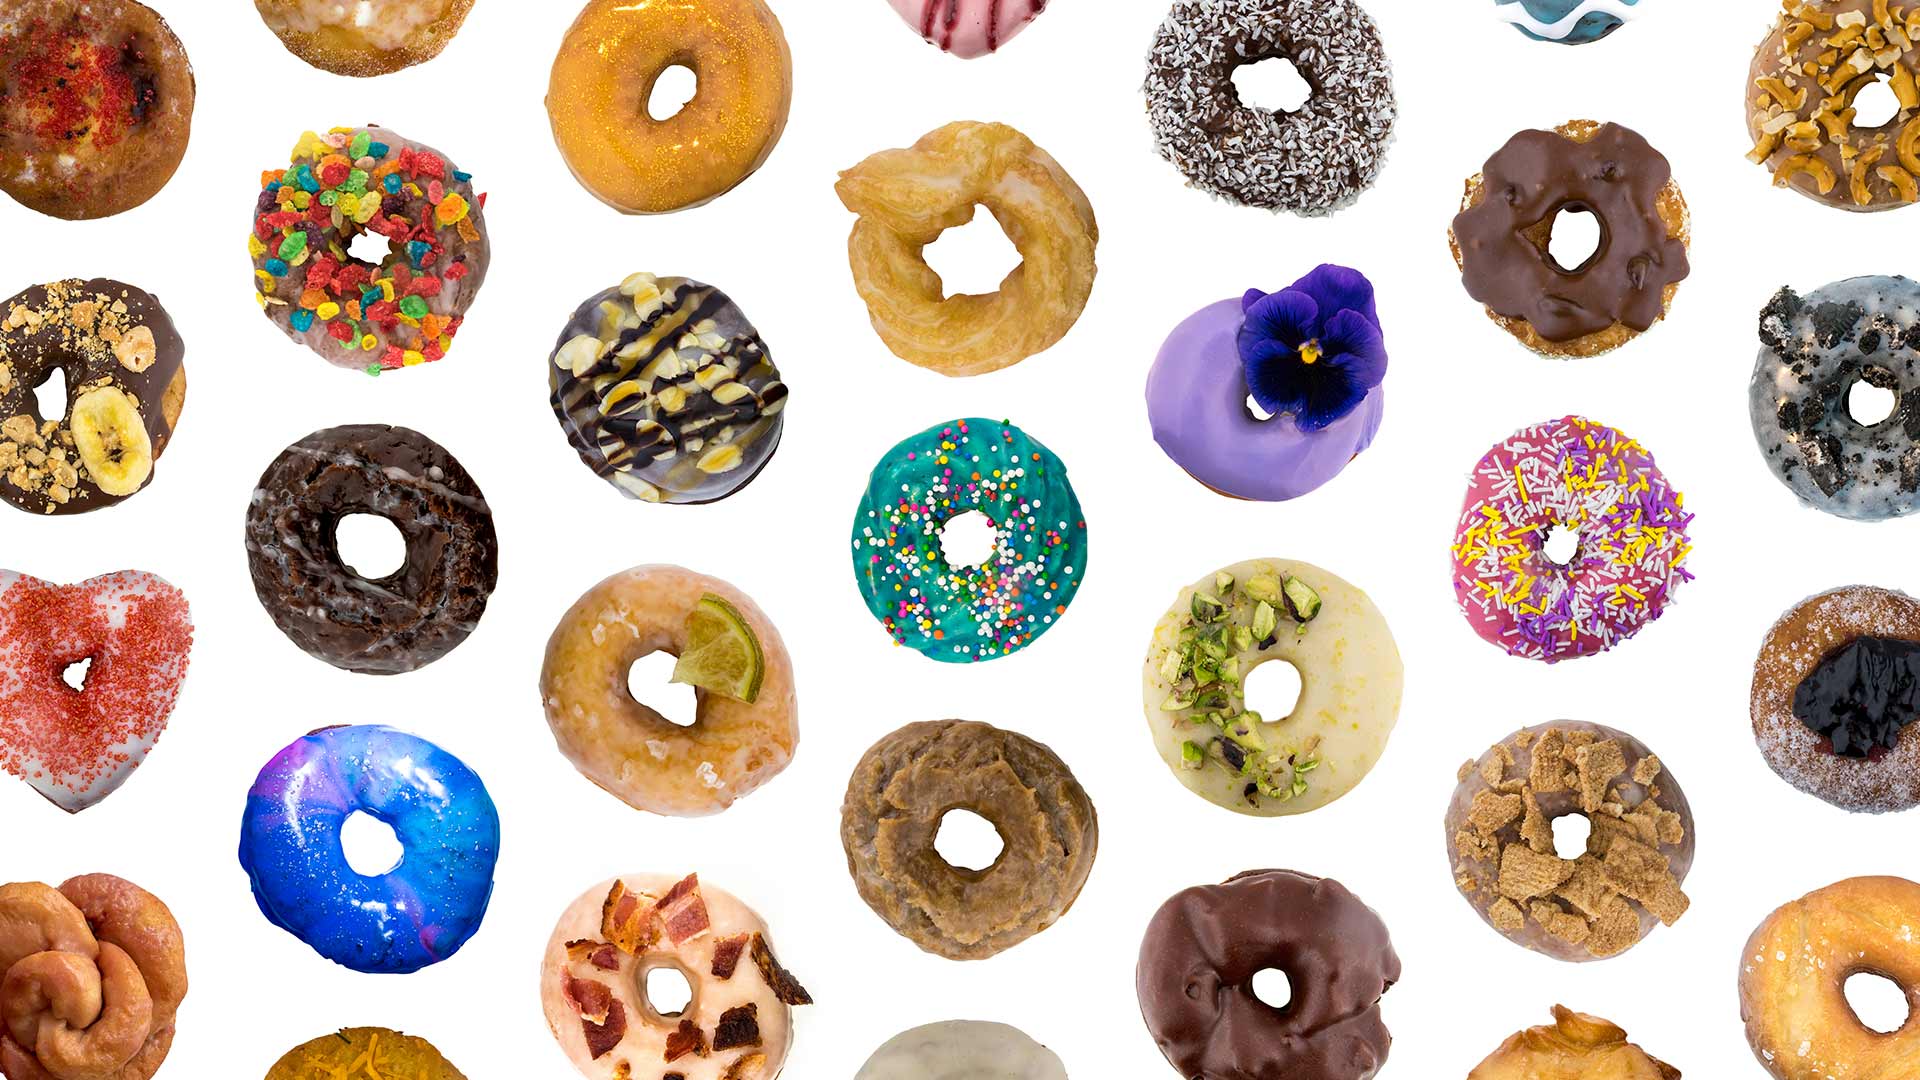 Image of different varieties of donuts